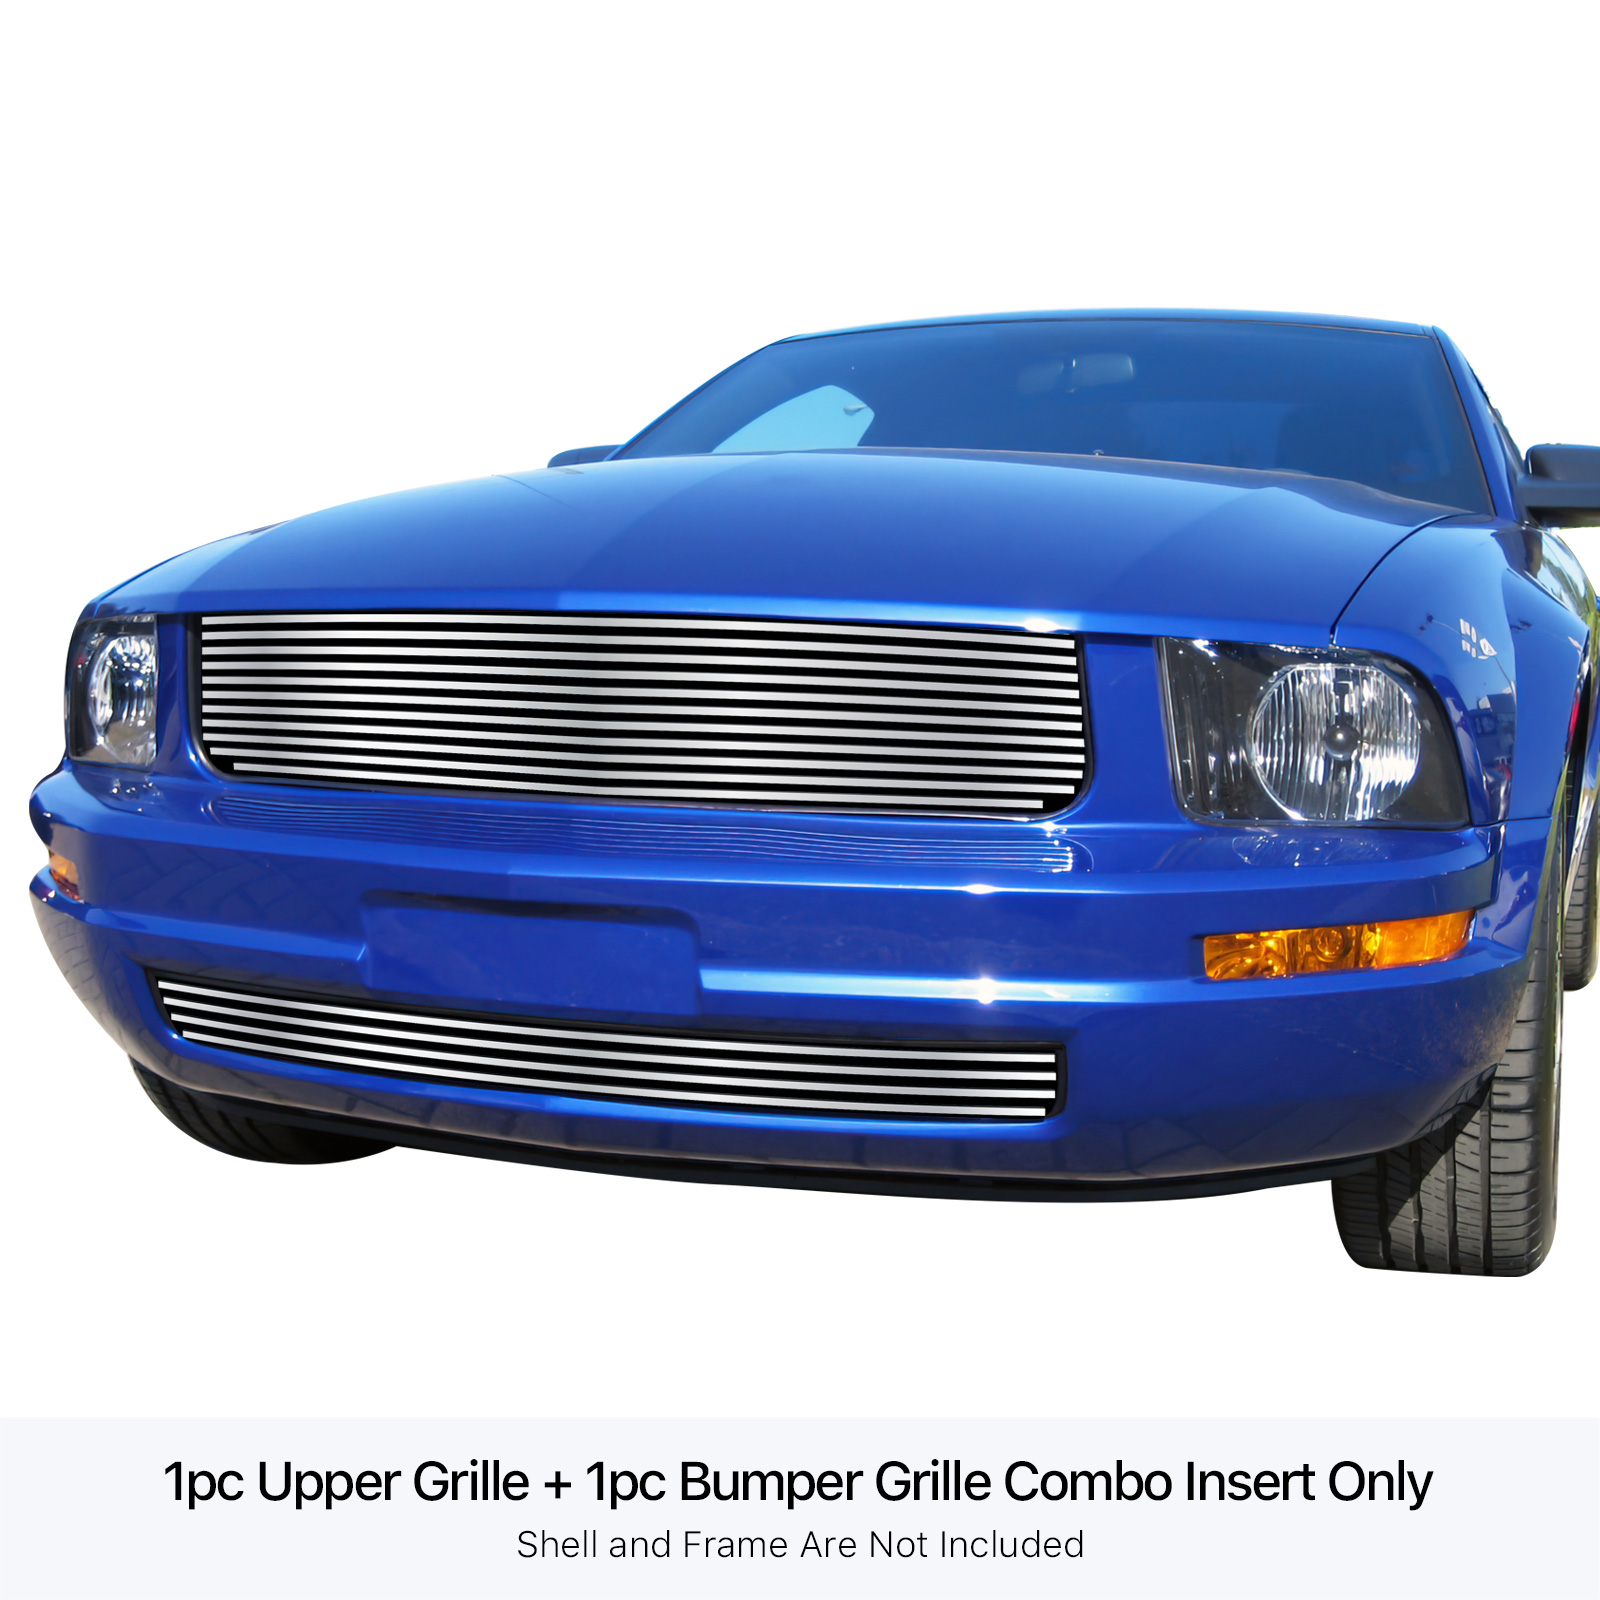 2005-2009 Ford Mustang V6 Except Pony Package MAIN UPPER + LOWER BUMPER Stainless Steel Billet Grille